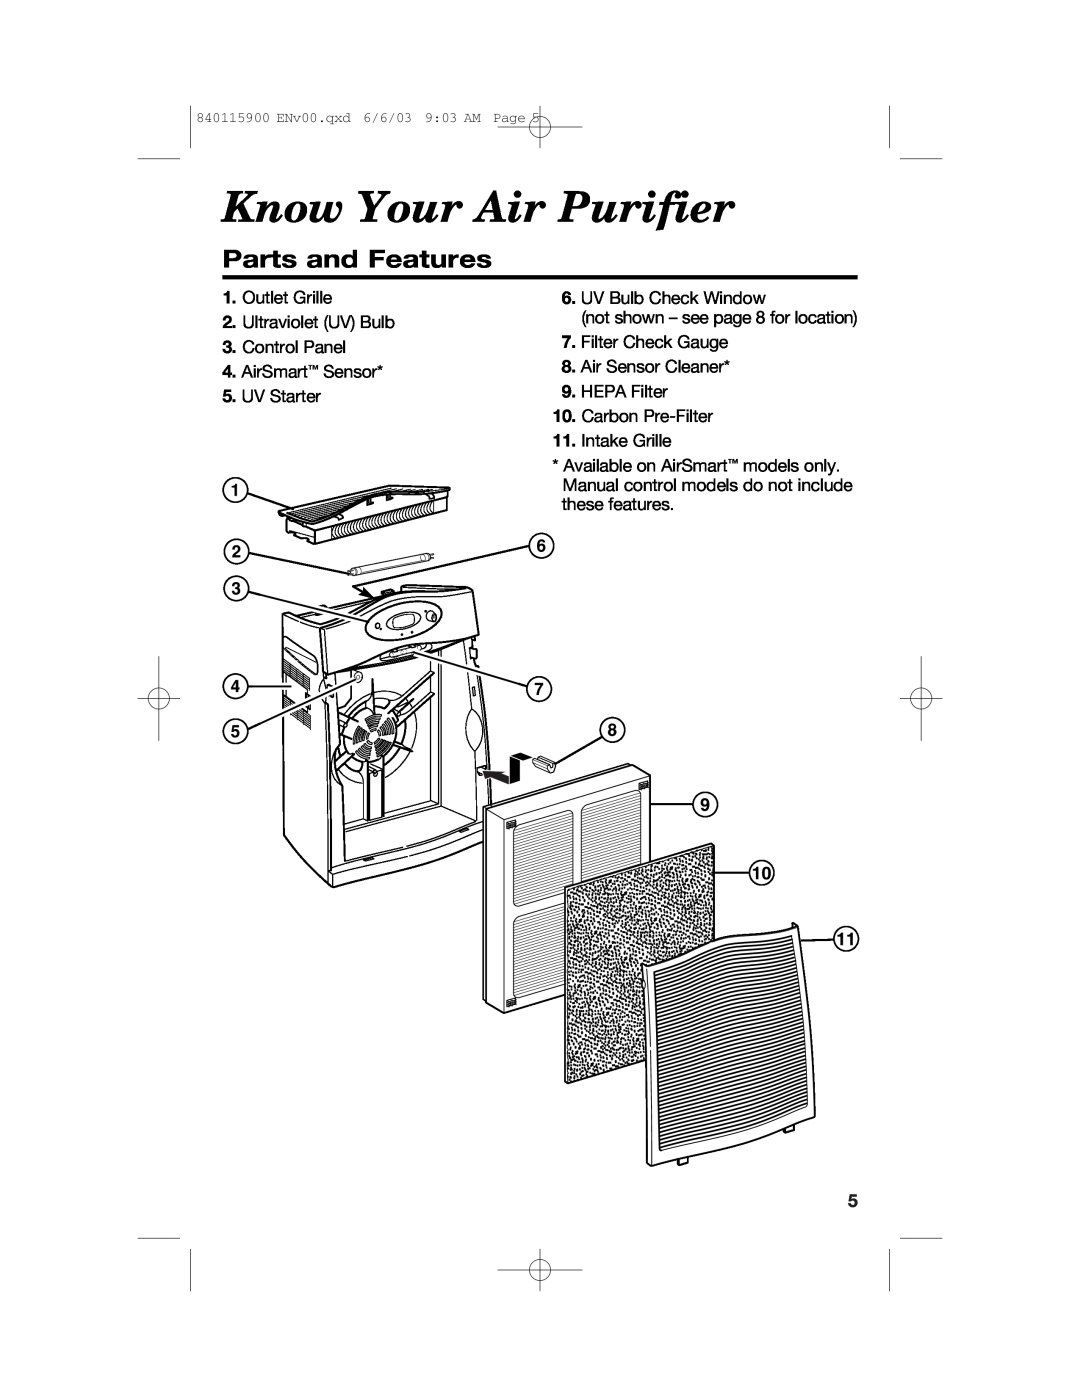 Hamilton Beach 840115900 manual Know Your Air Purifier, Parts and Features 